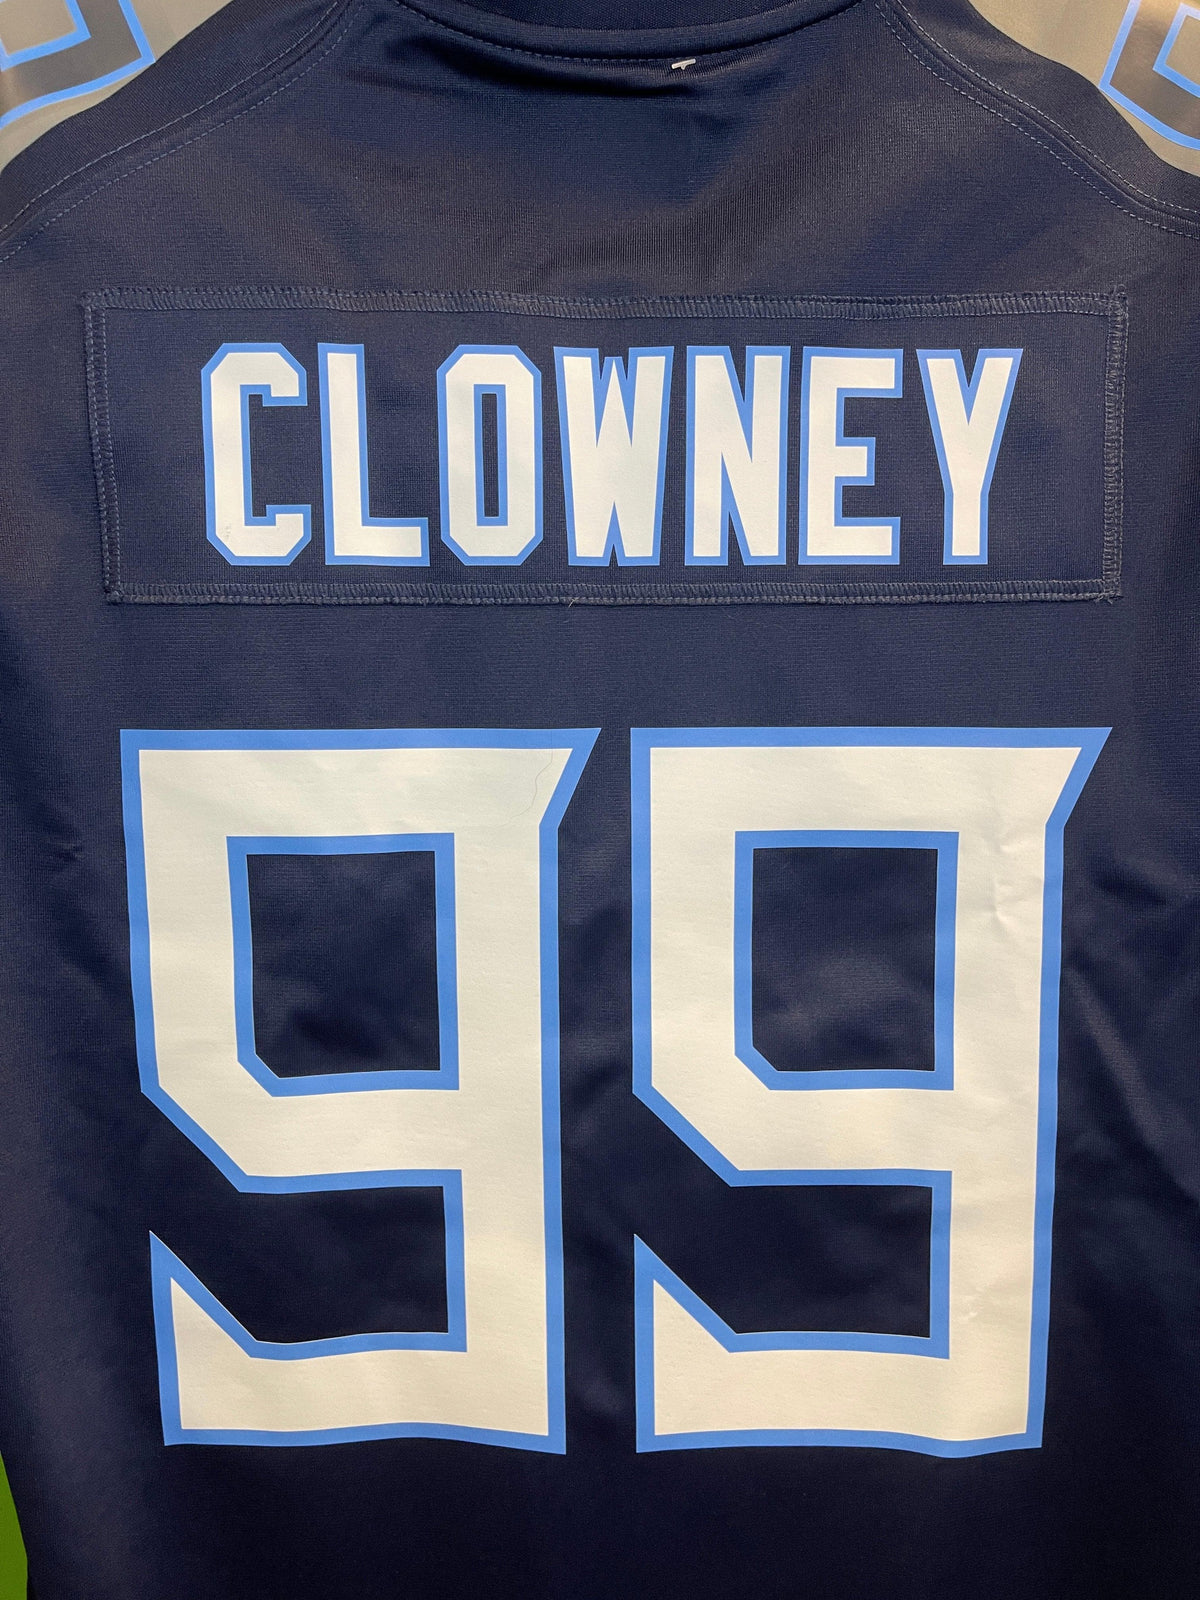 NFL Tennessee Titans Clowney #99 Game Jersey Men's Large NWT